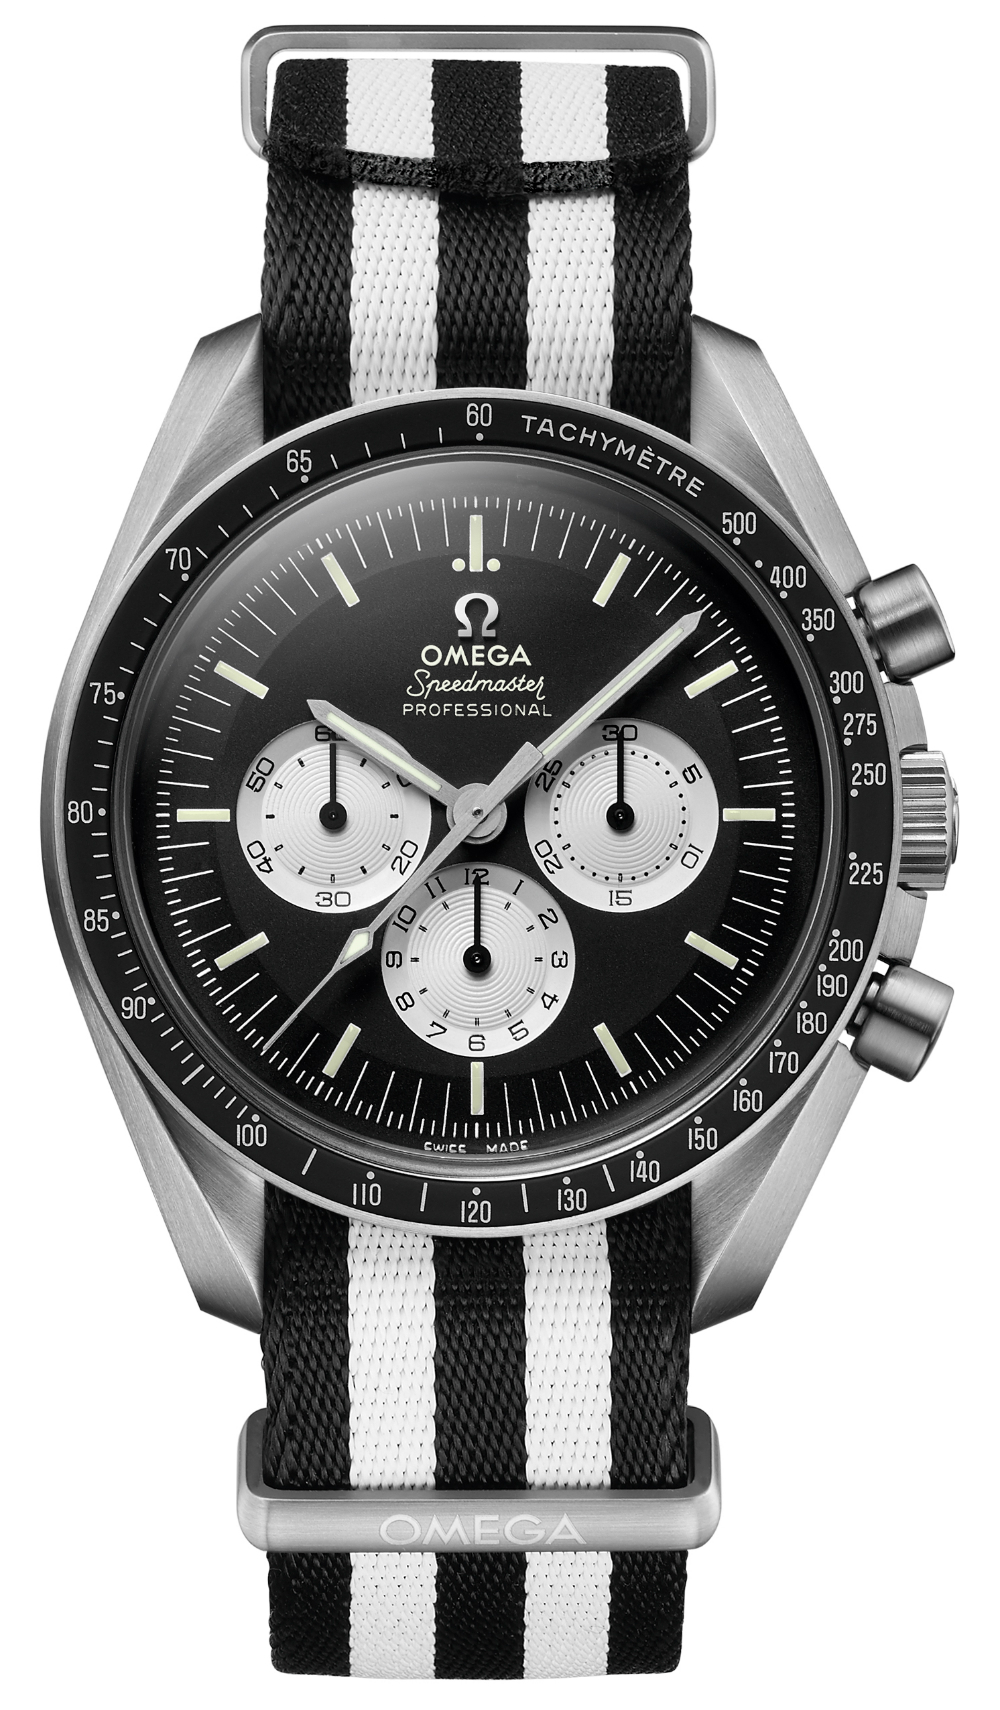 omega speedy tuesday limited edition